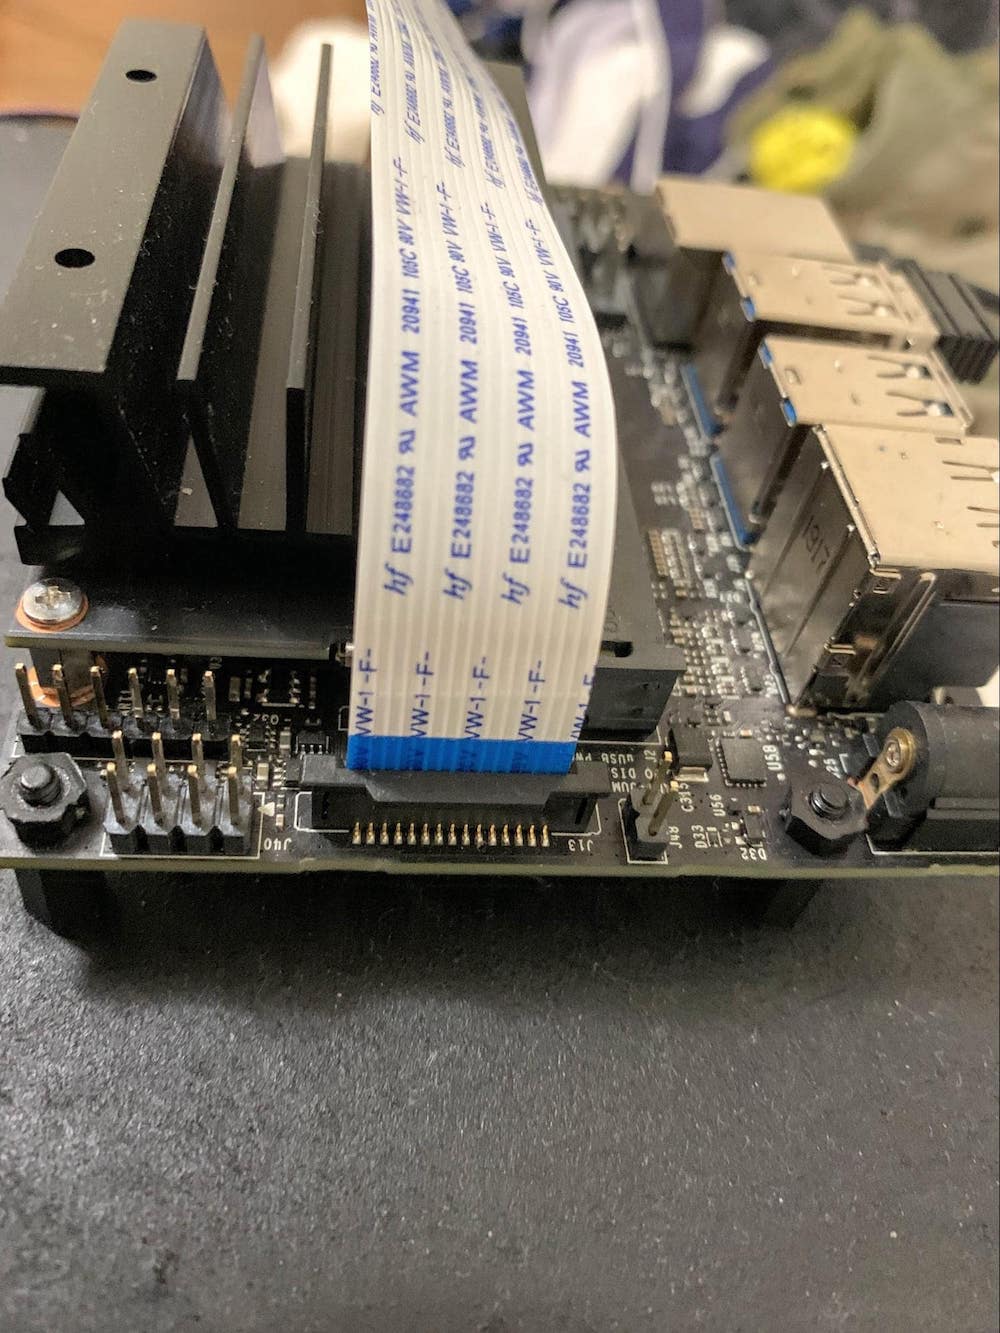 Connecting the camera ribbon cable with the CSI port.